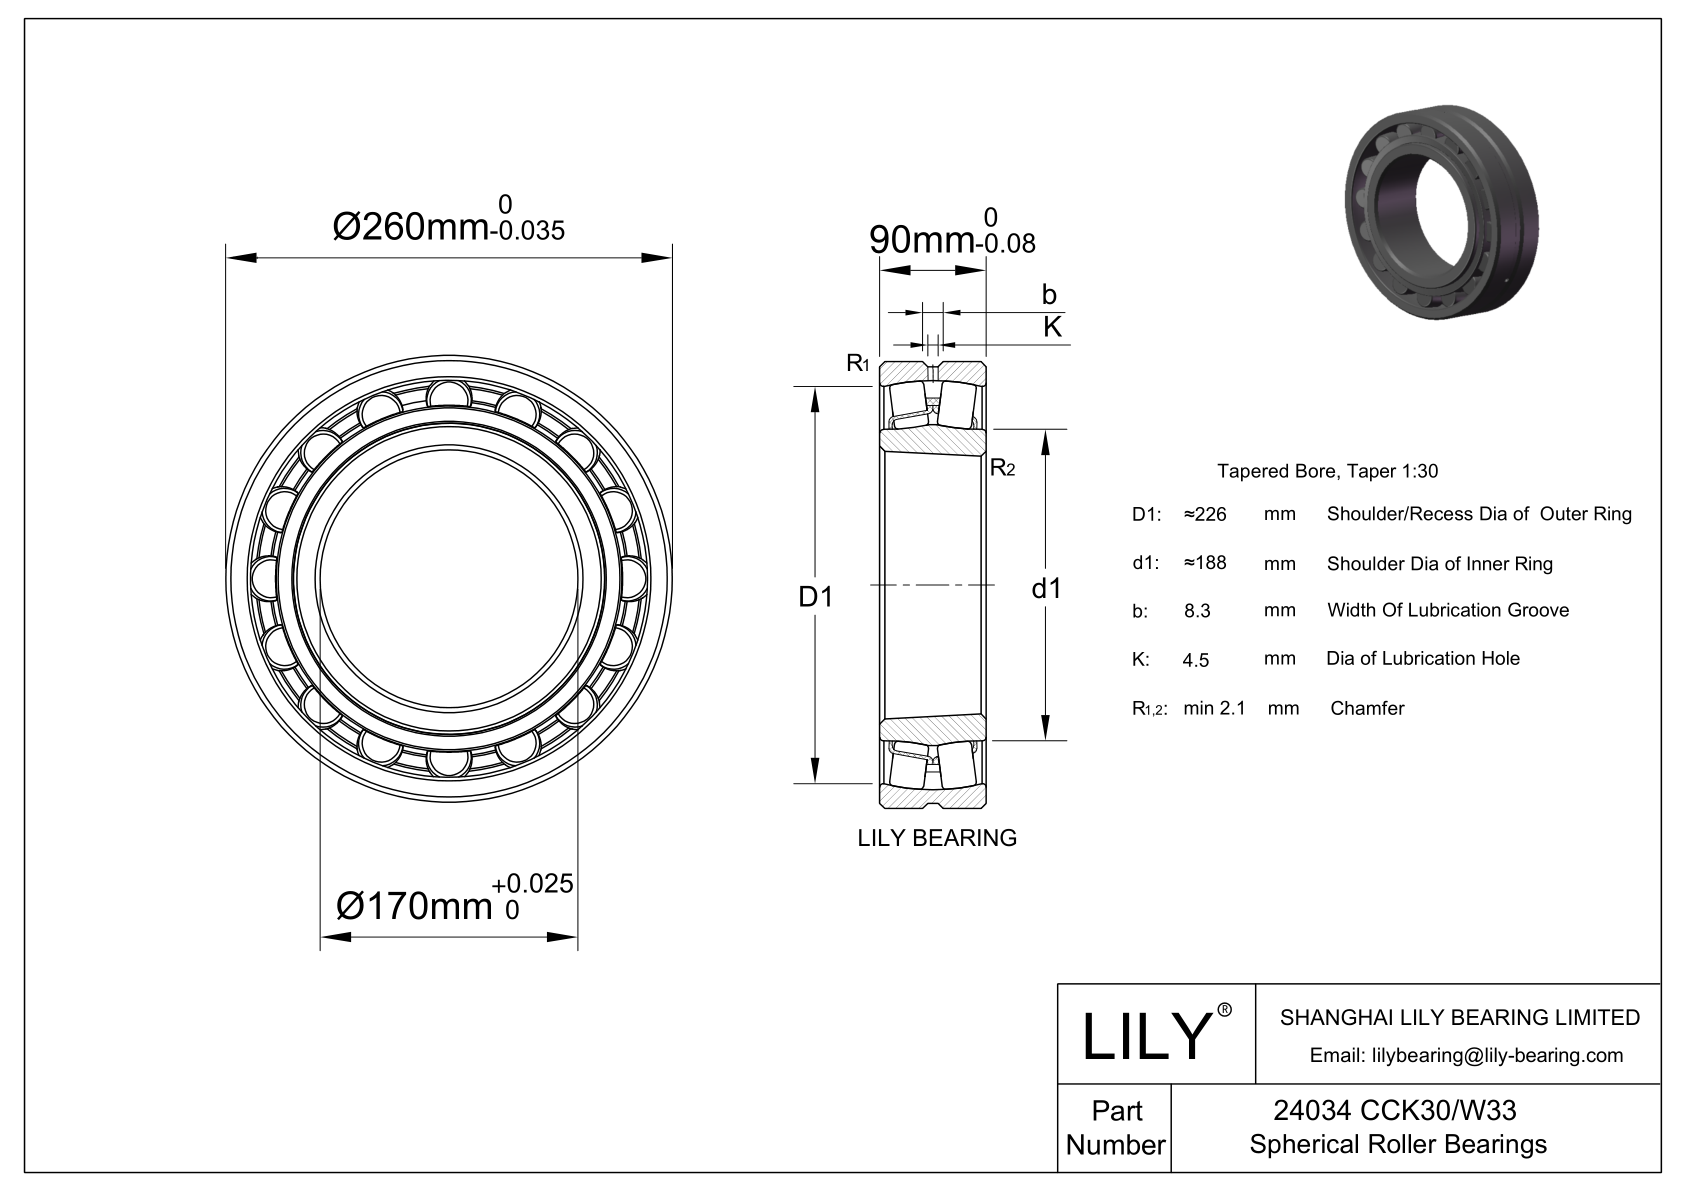 24034 CCK30/W33 Double Row Spherical Roller Bearing cad drawing